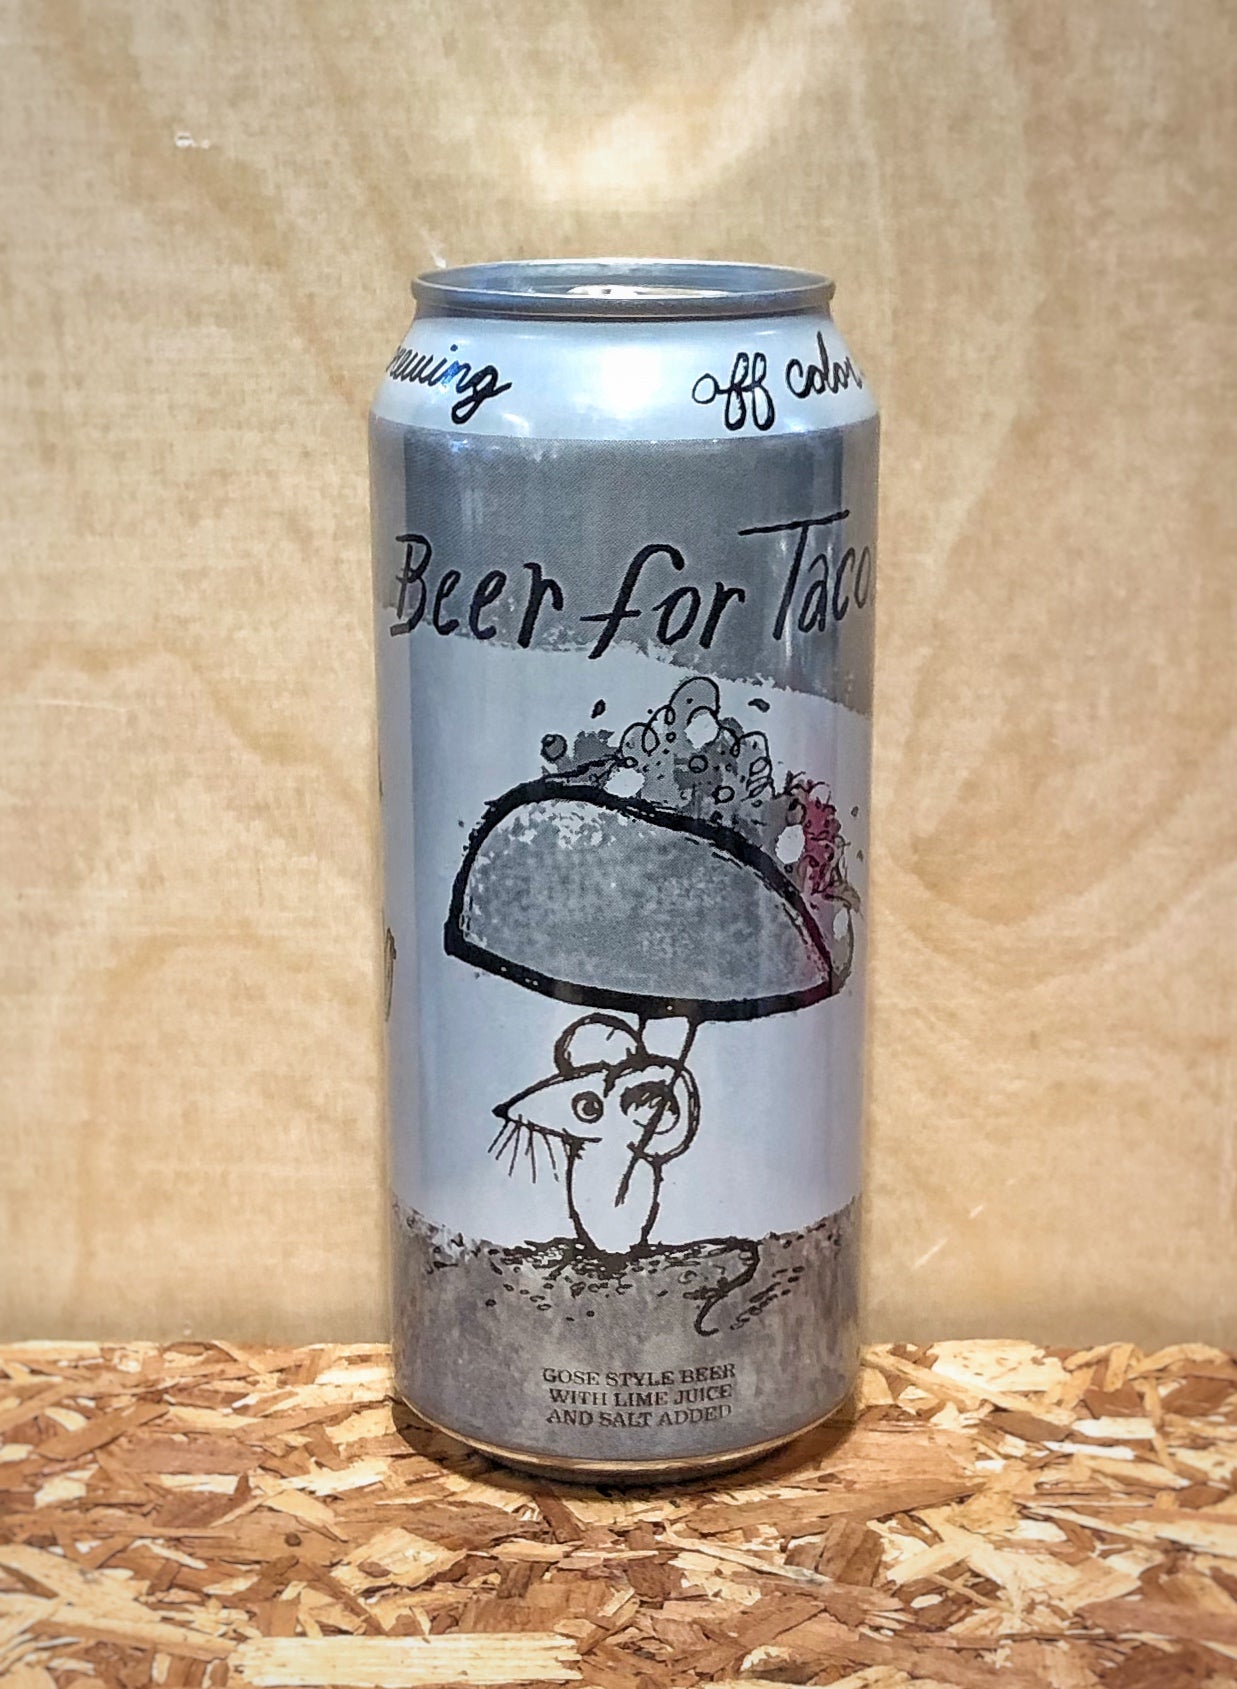 Off Color Brewing 'Beer for Tacos' Wheat Beer with Lime Juice, Coriander, and Himalayan Salt (Chicago, IL)